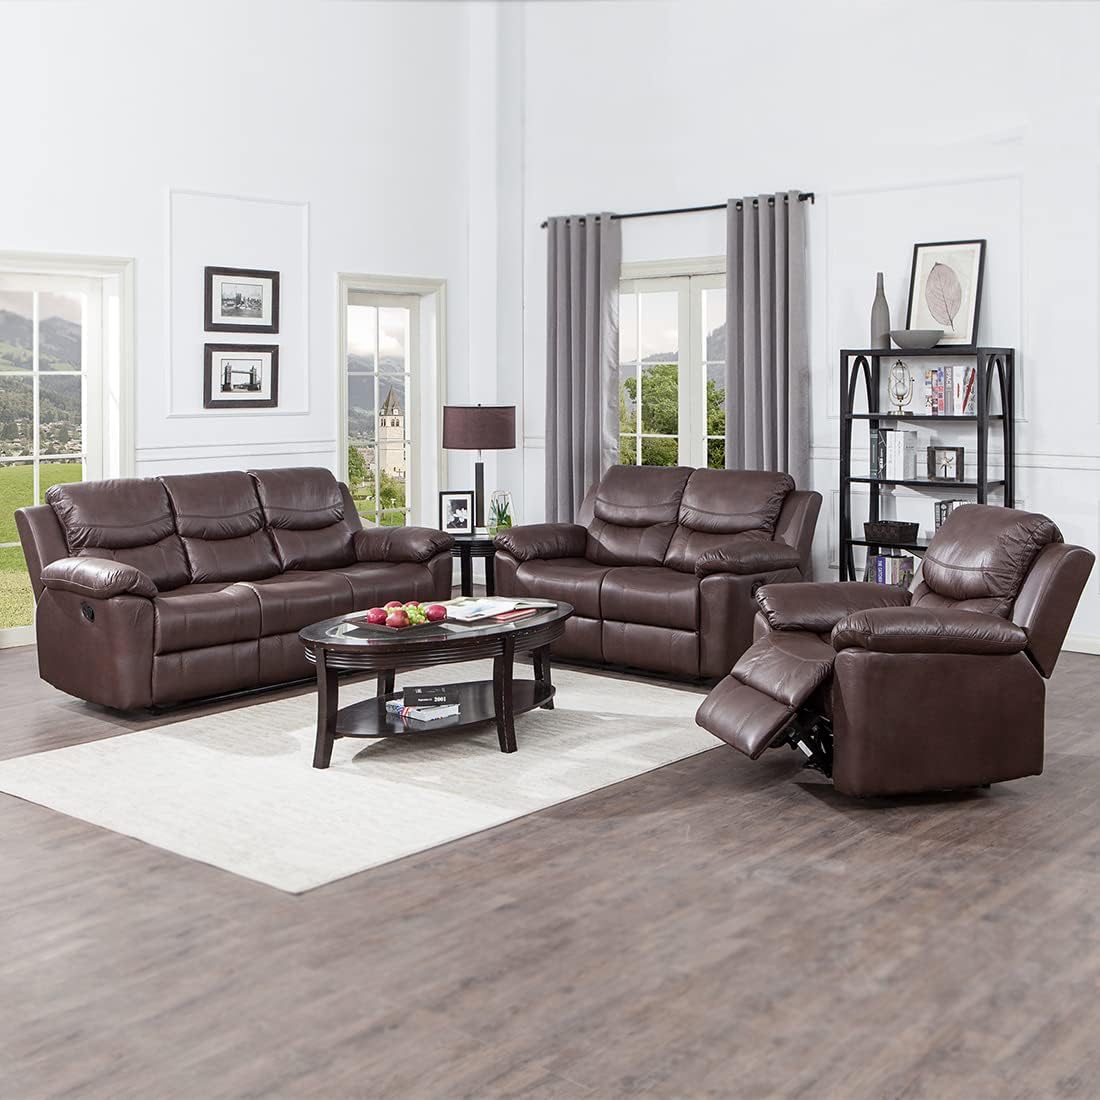 JUNTOSO 3 Pieces Recliner Sofa Sets Bonded Leather Lounge Chair ...